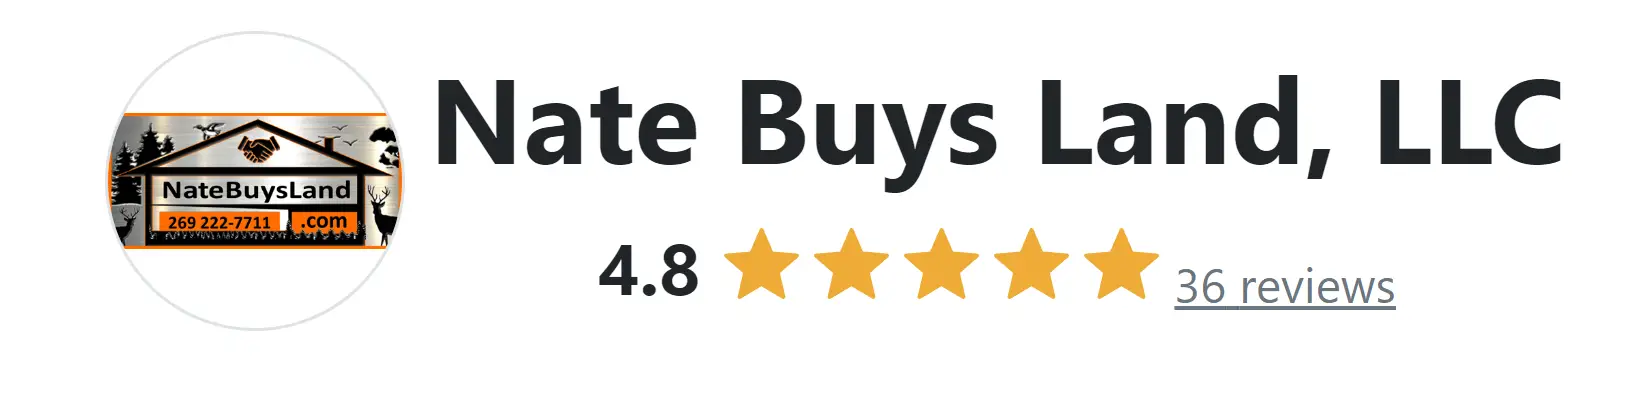 Nate Buys Land, LLC has a review rating of 4.8 stars out of 5 consisting of 36 reviews total